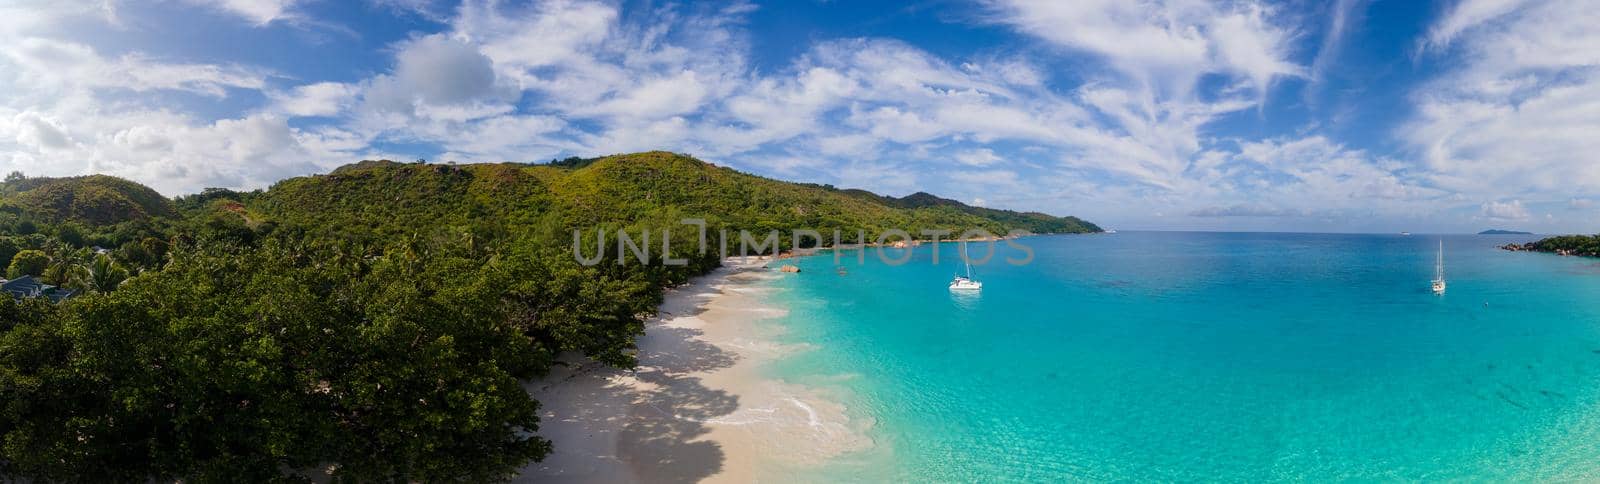 Praslin Seychelles tropical island with withe beaches and palm trees, Anse Lazio beach,Palm tree stands over deserted tropical island dream beach in Anse Lazio, Seychelles.